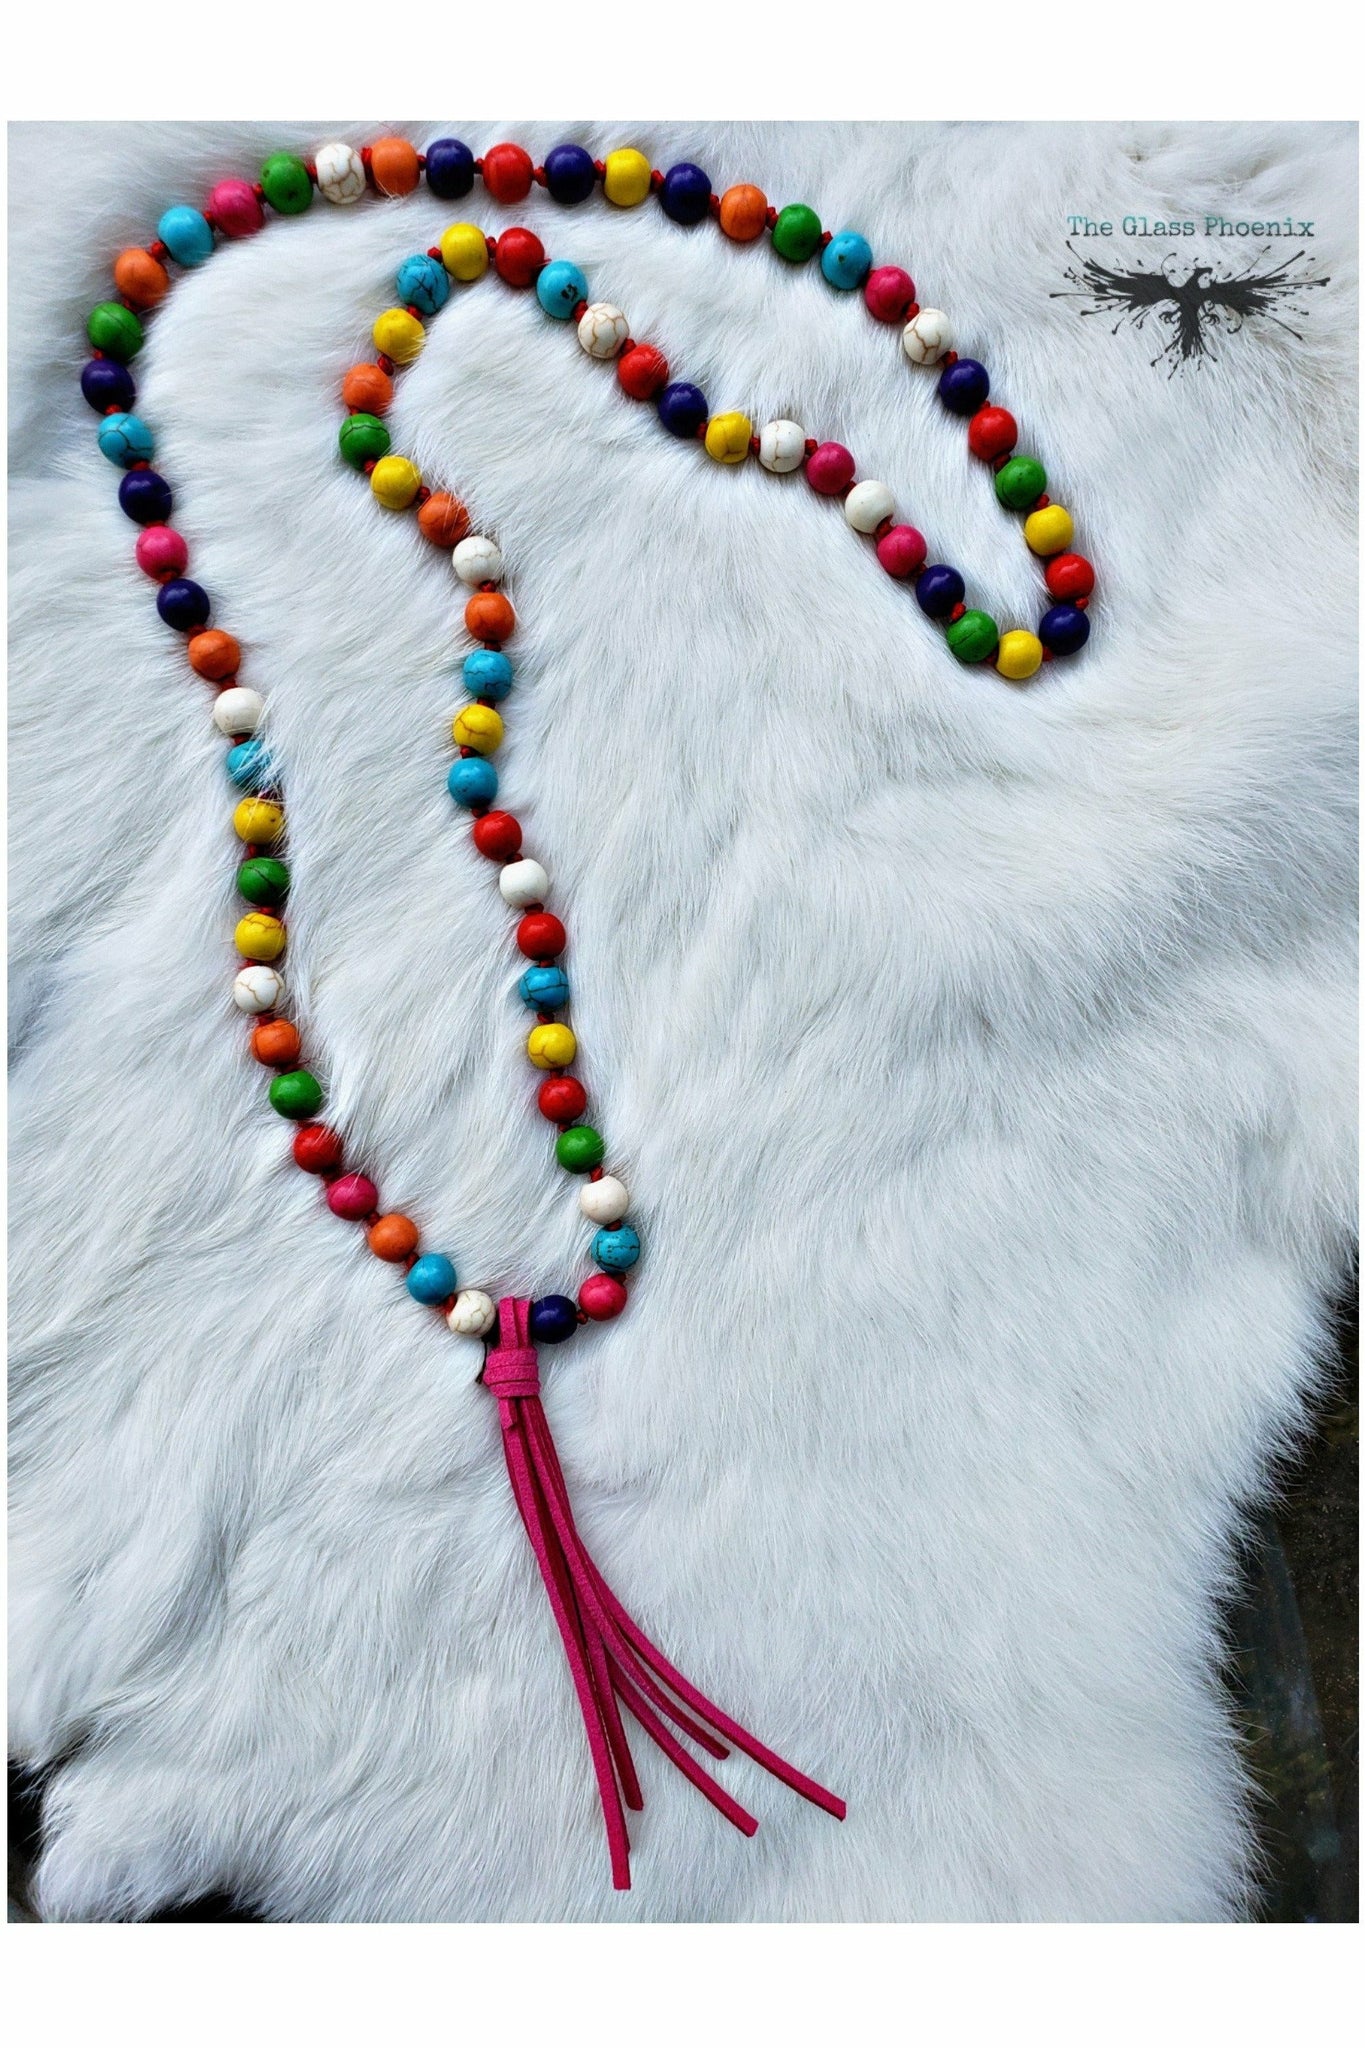 Psychedelic Rainbow Tassel Necklace